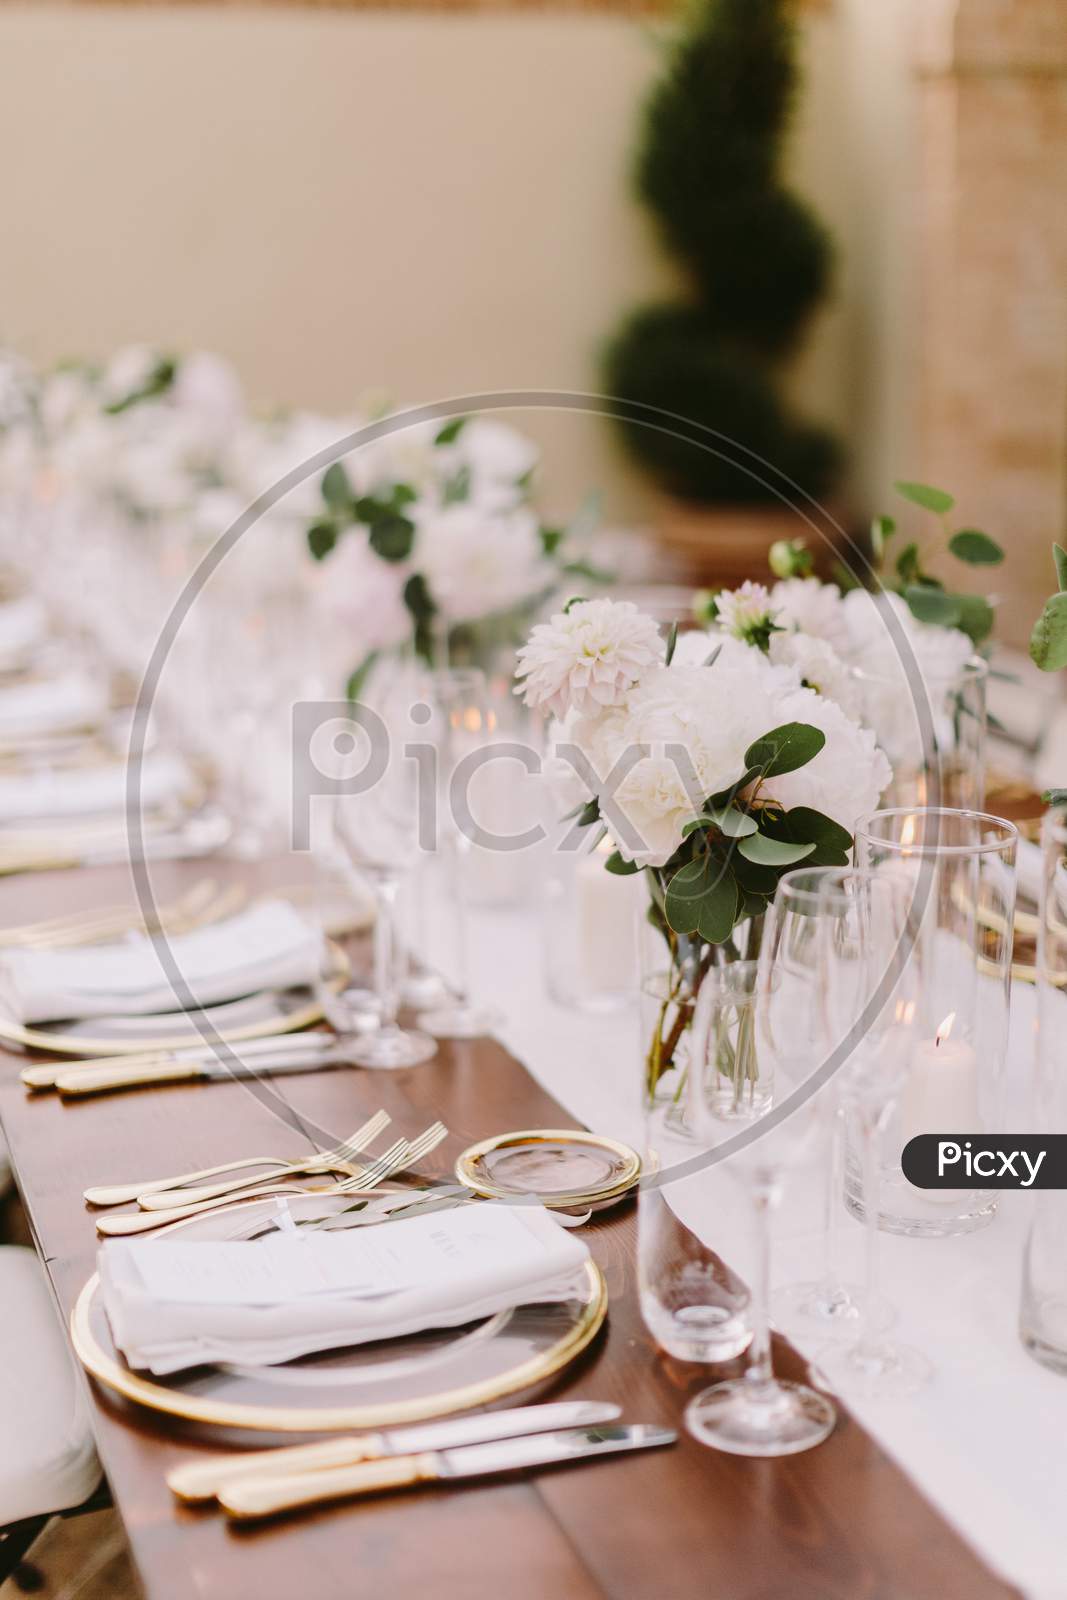 Wedding Banquet Decoration In Italy